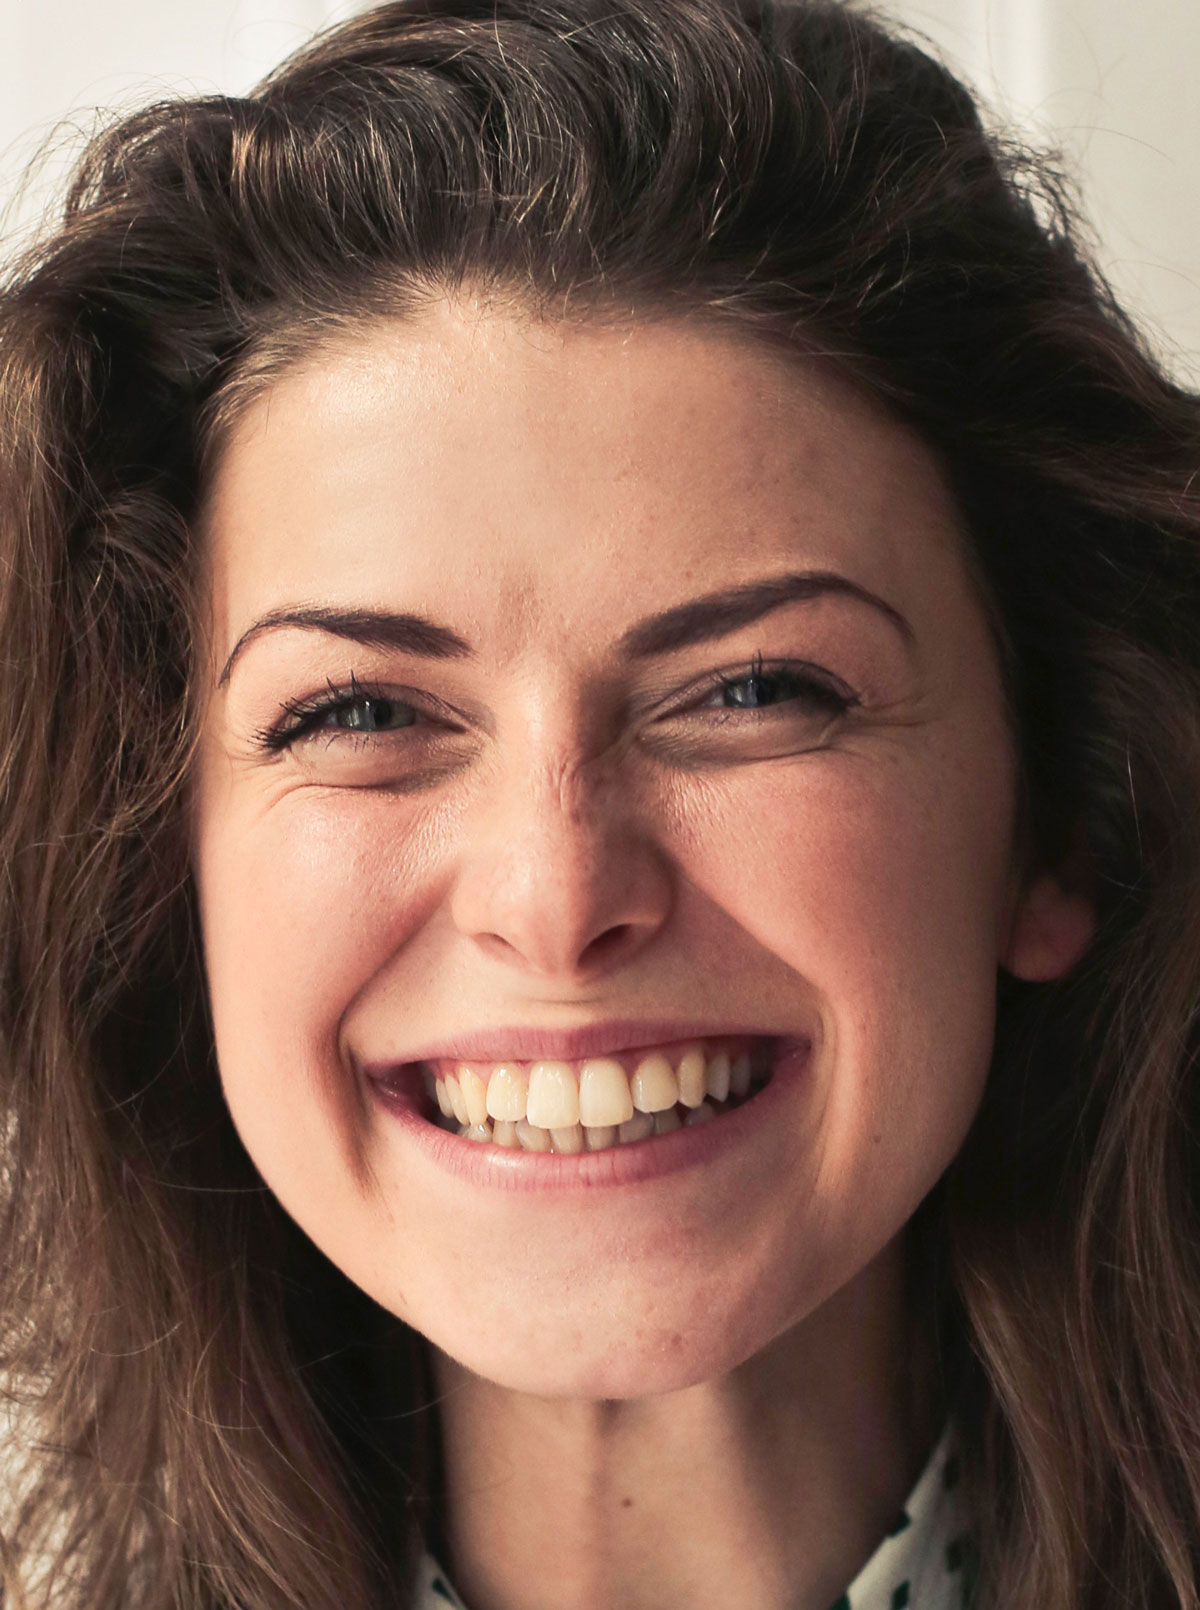 An example of the big smile image